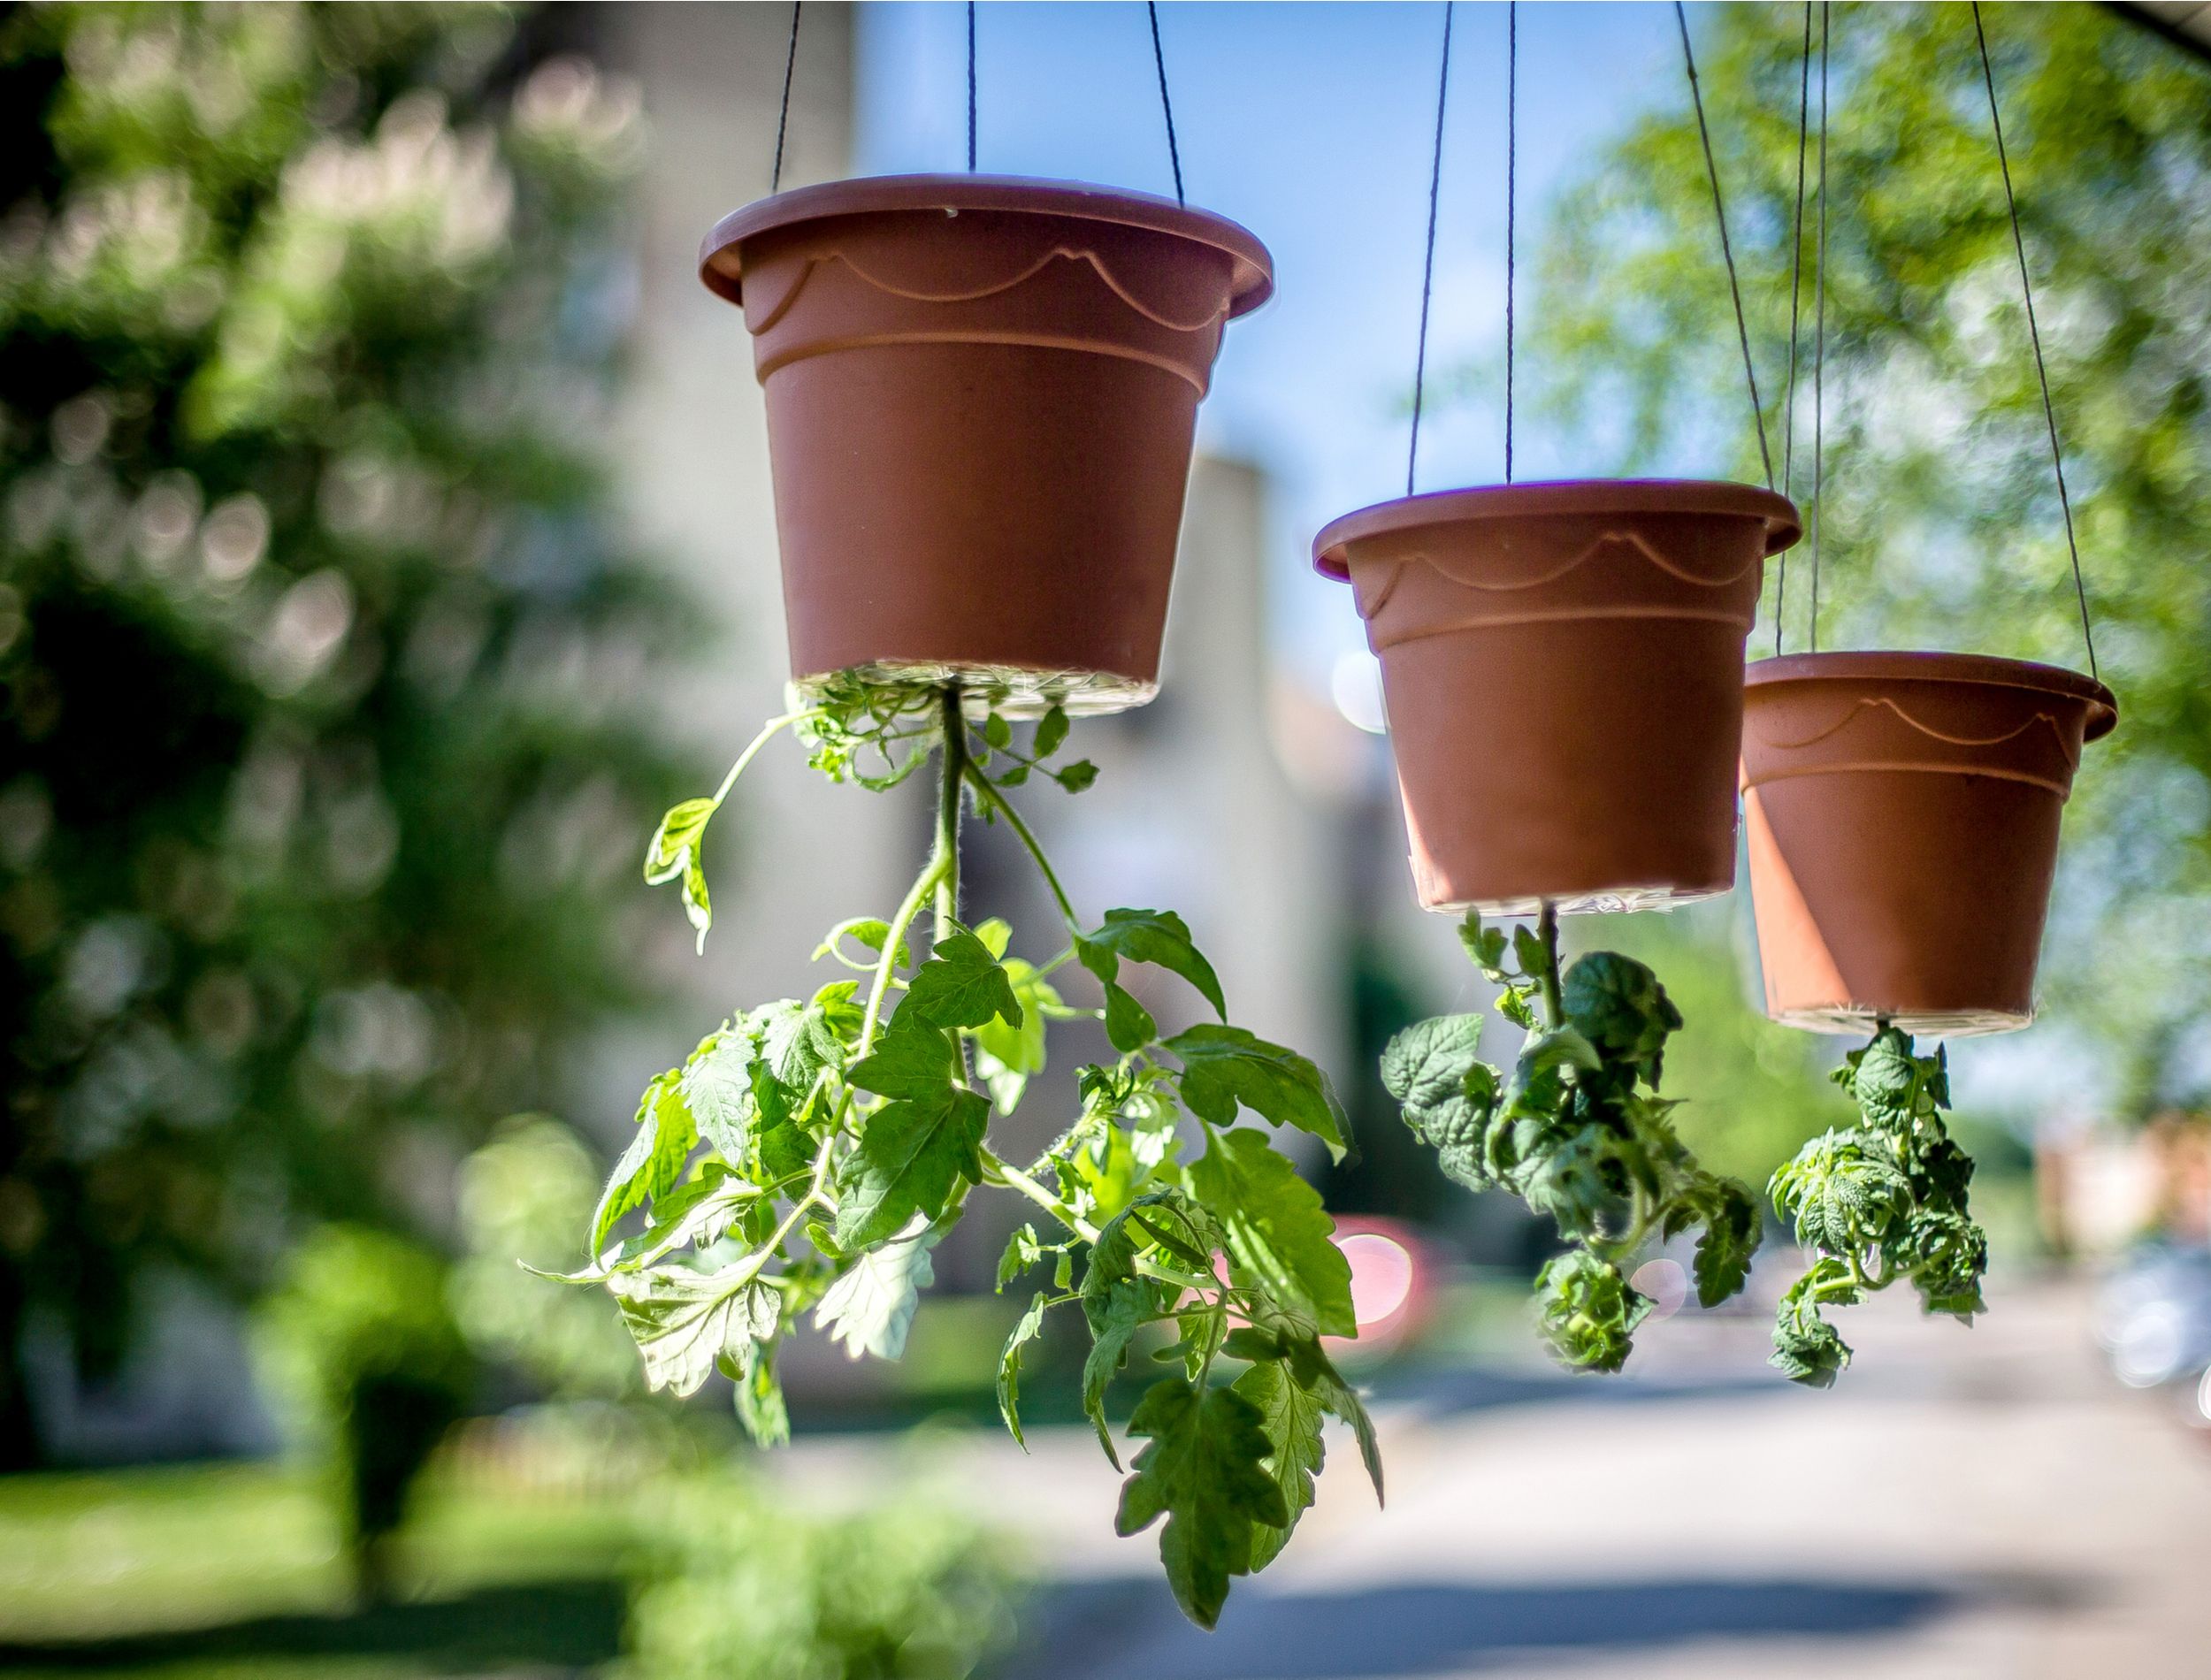 Tomatoes for upside down gardening